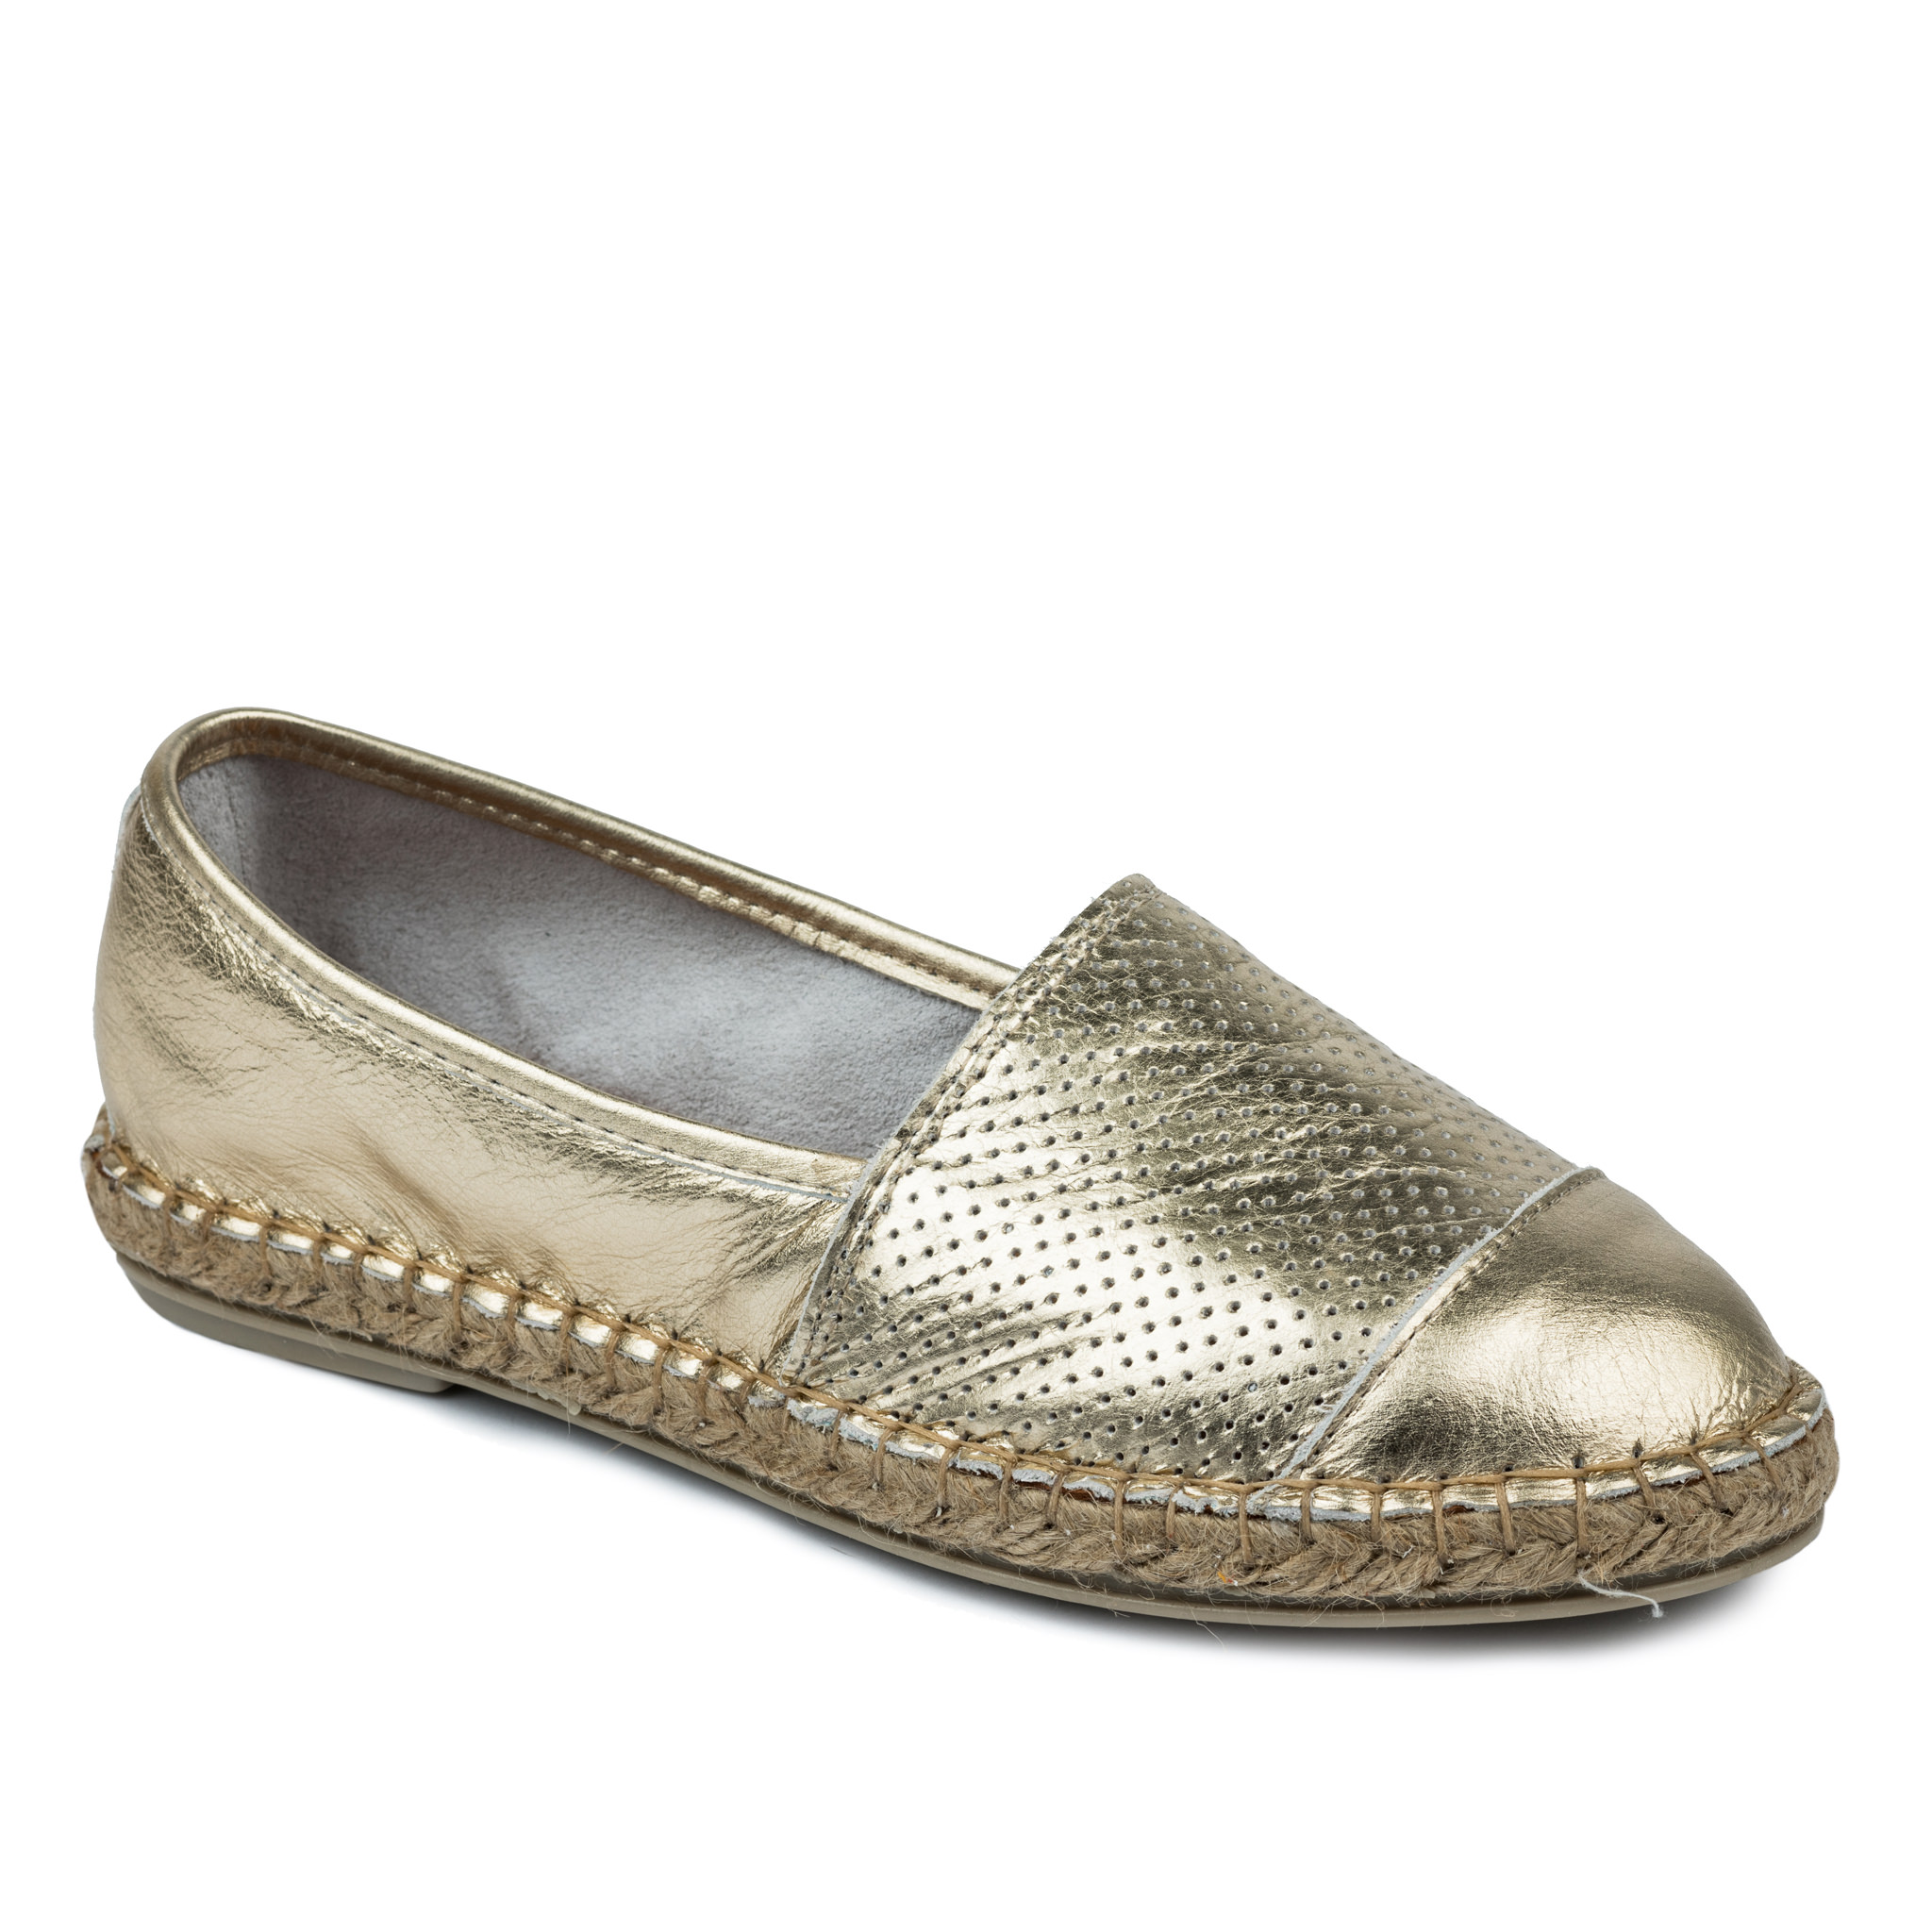 Leather espadrilles A578 - GOLD